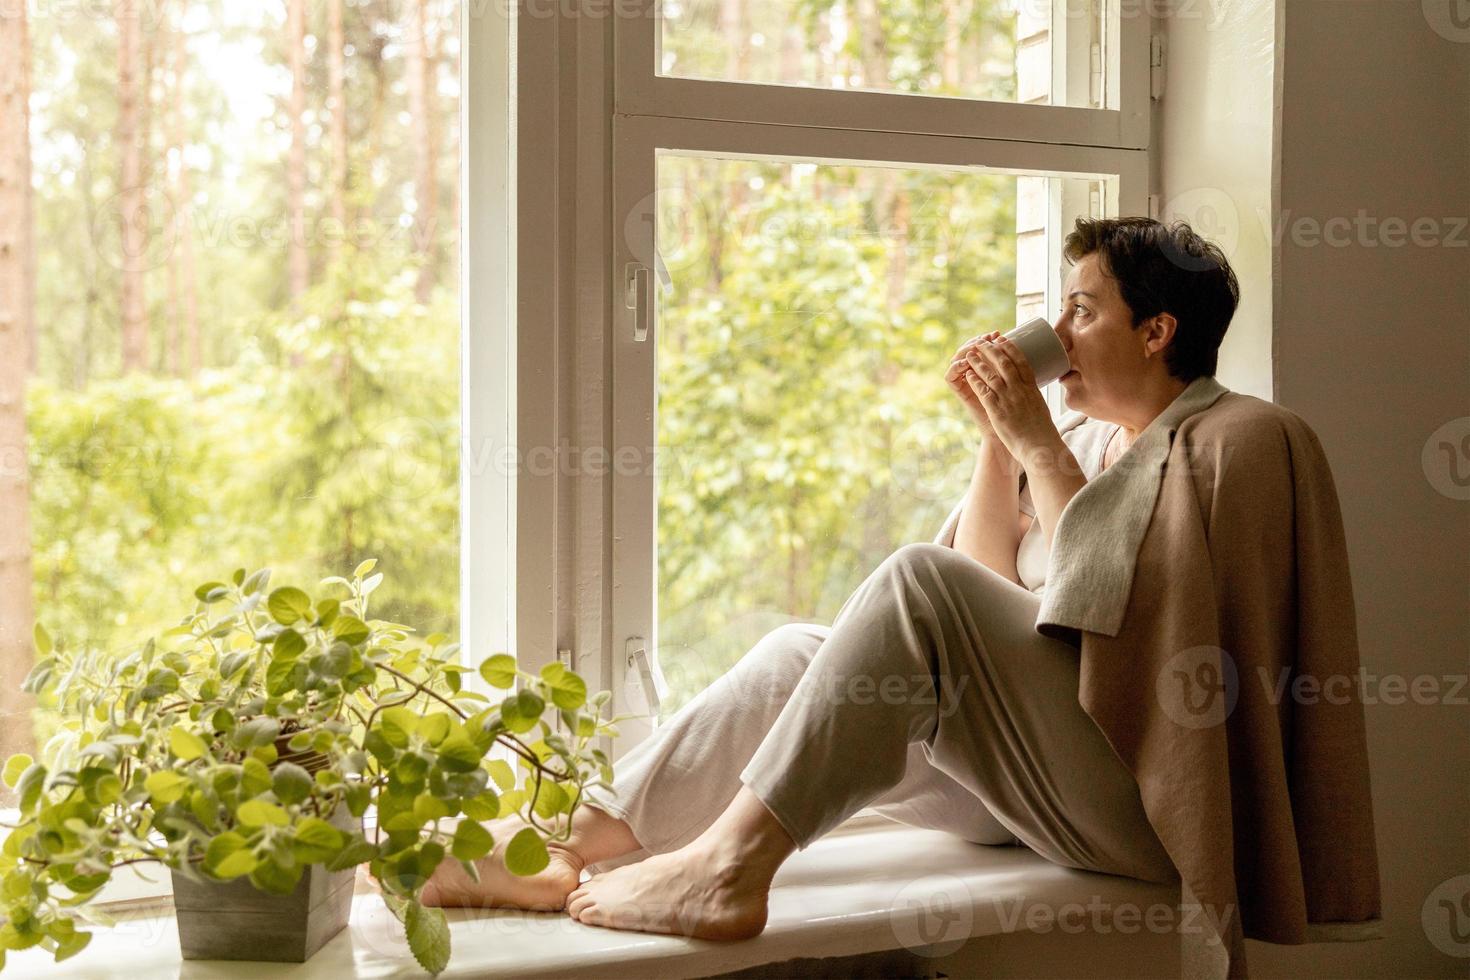 Middle age beautiful woman sitting on windowsill, drinking tea, dreaming. 50-year-old woman relaxing with cup of tea. Relax at home, looking away, thinking, stress free, peaceful mood, wellbeing alone photo